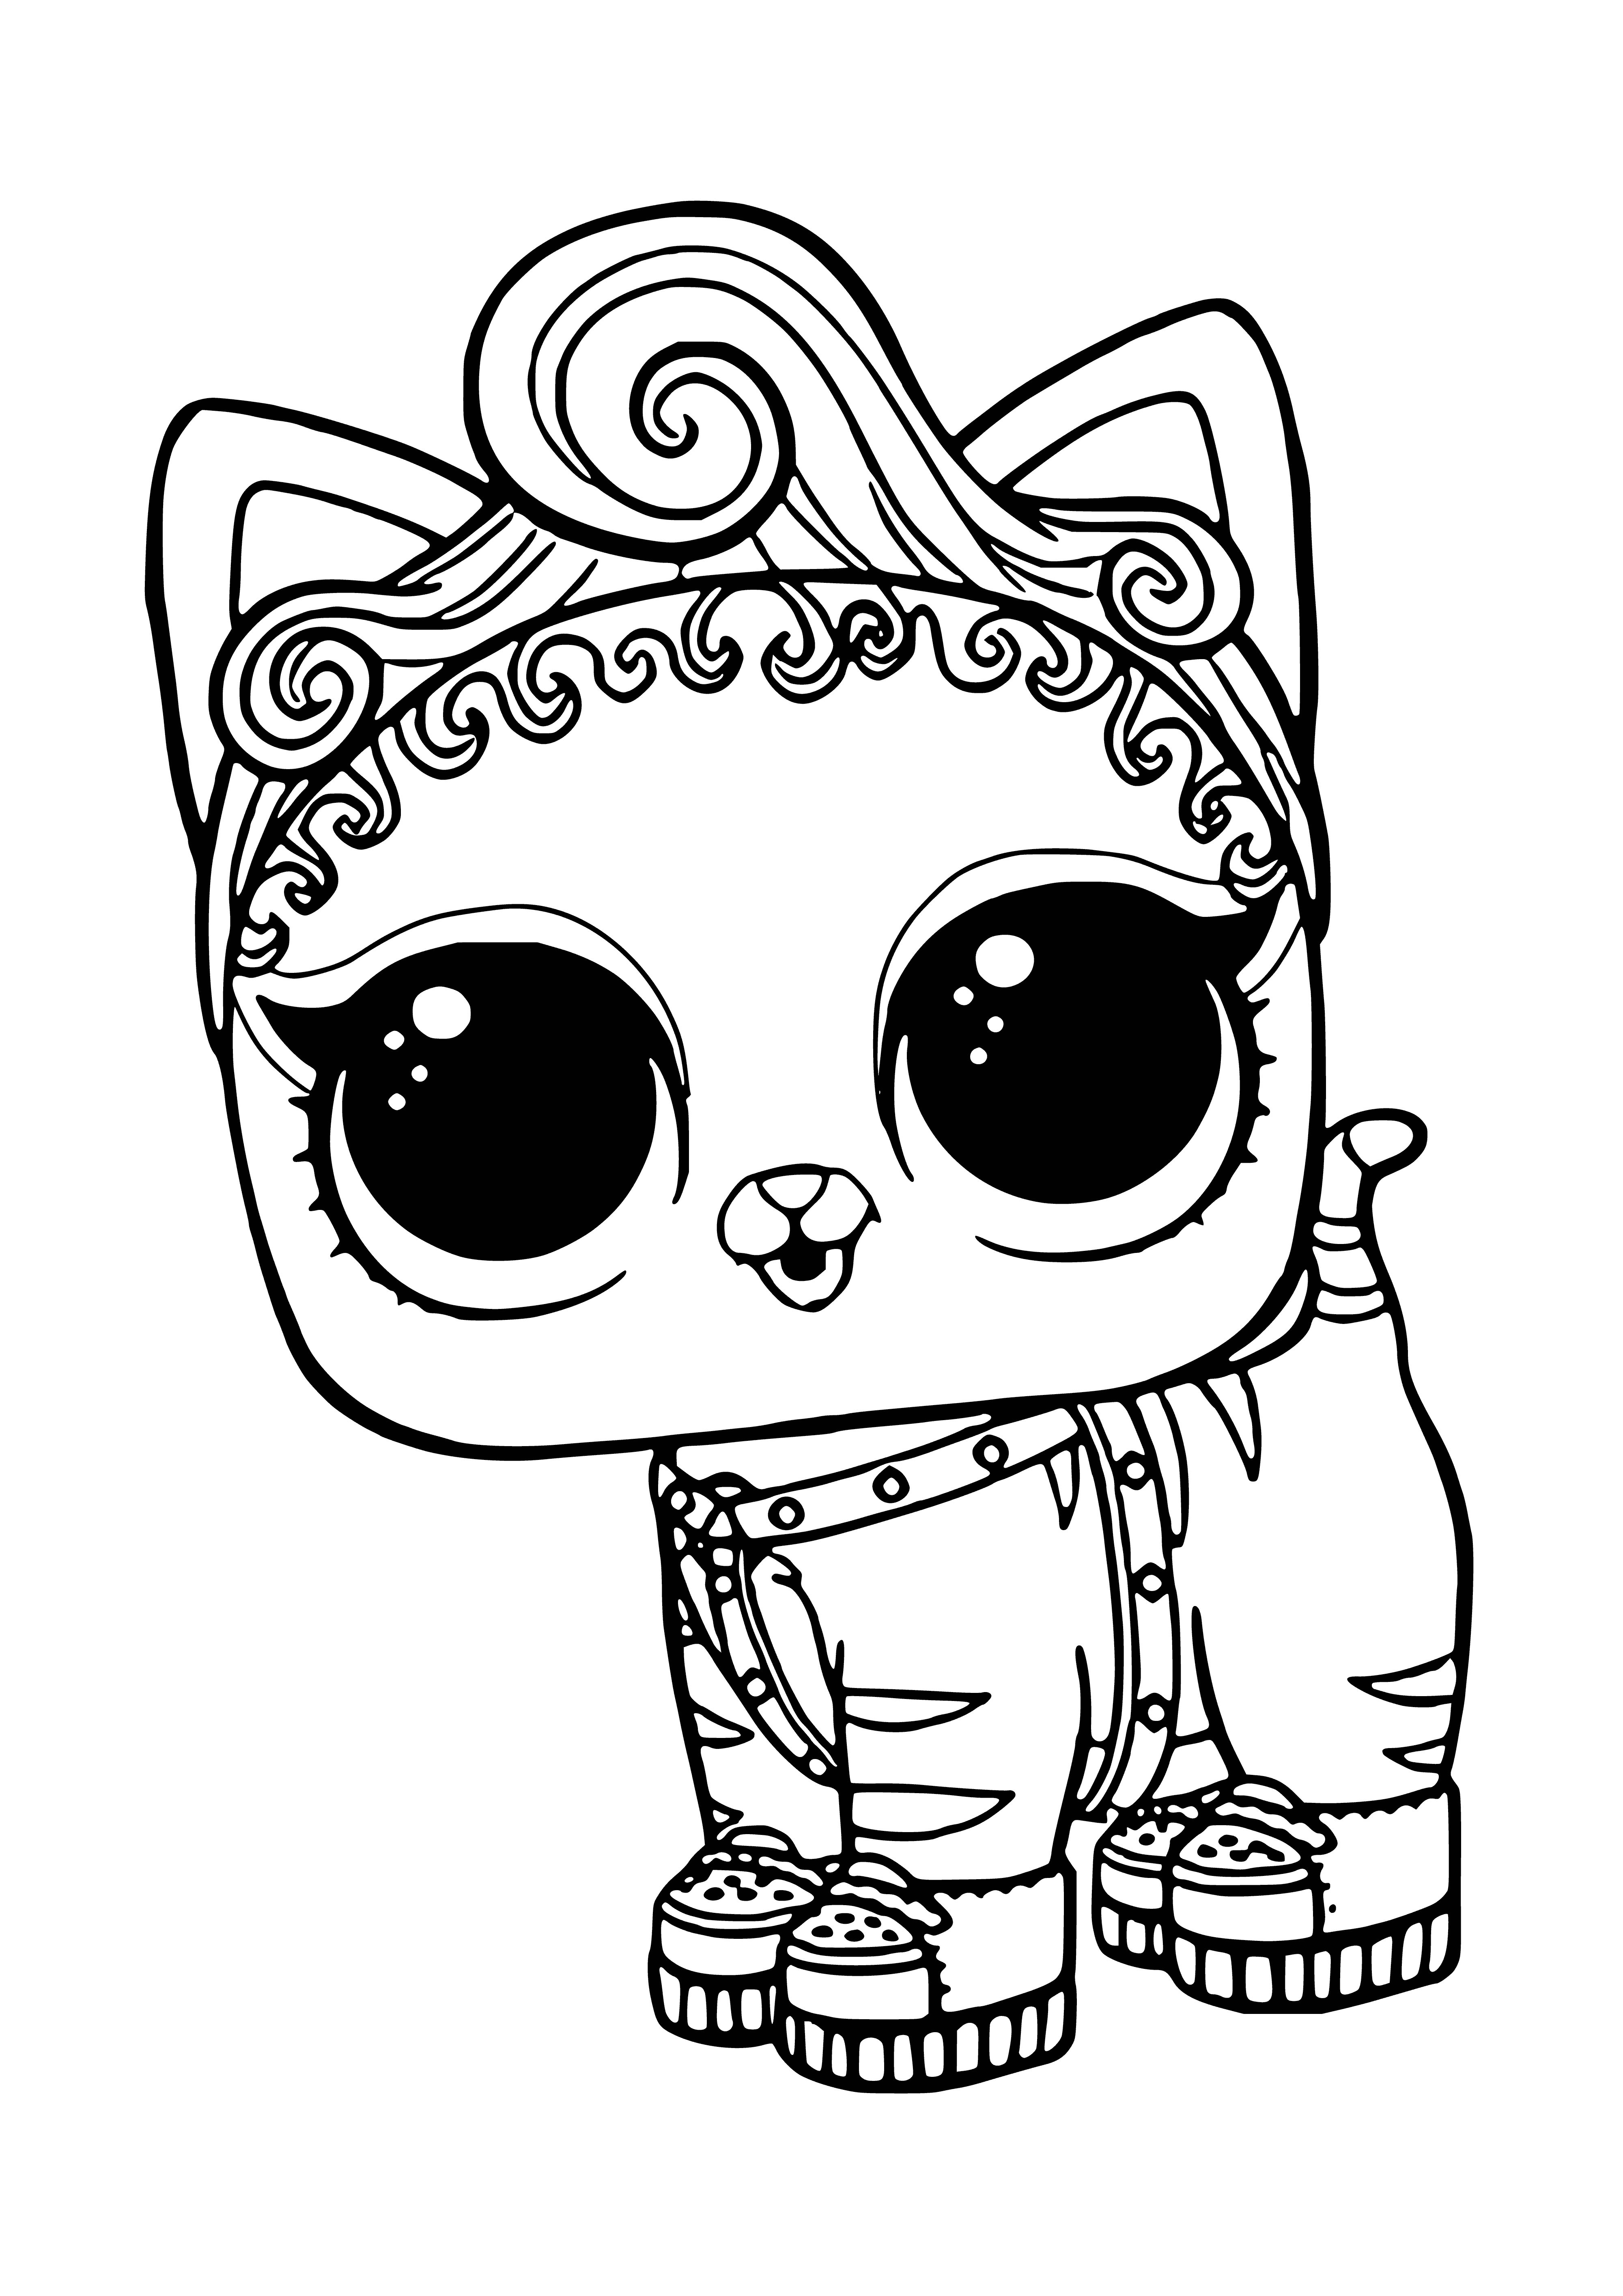 coloring page: Adorable pale kitty with blue eyes, pointy ears, fluffy tail, and black nose stares into the camera.